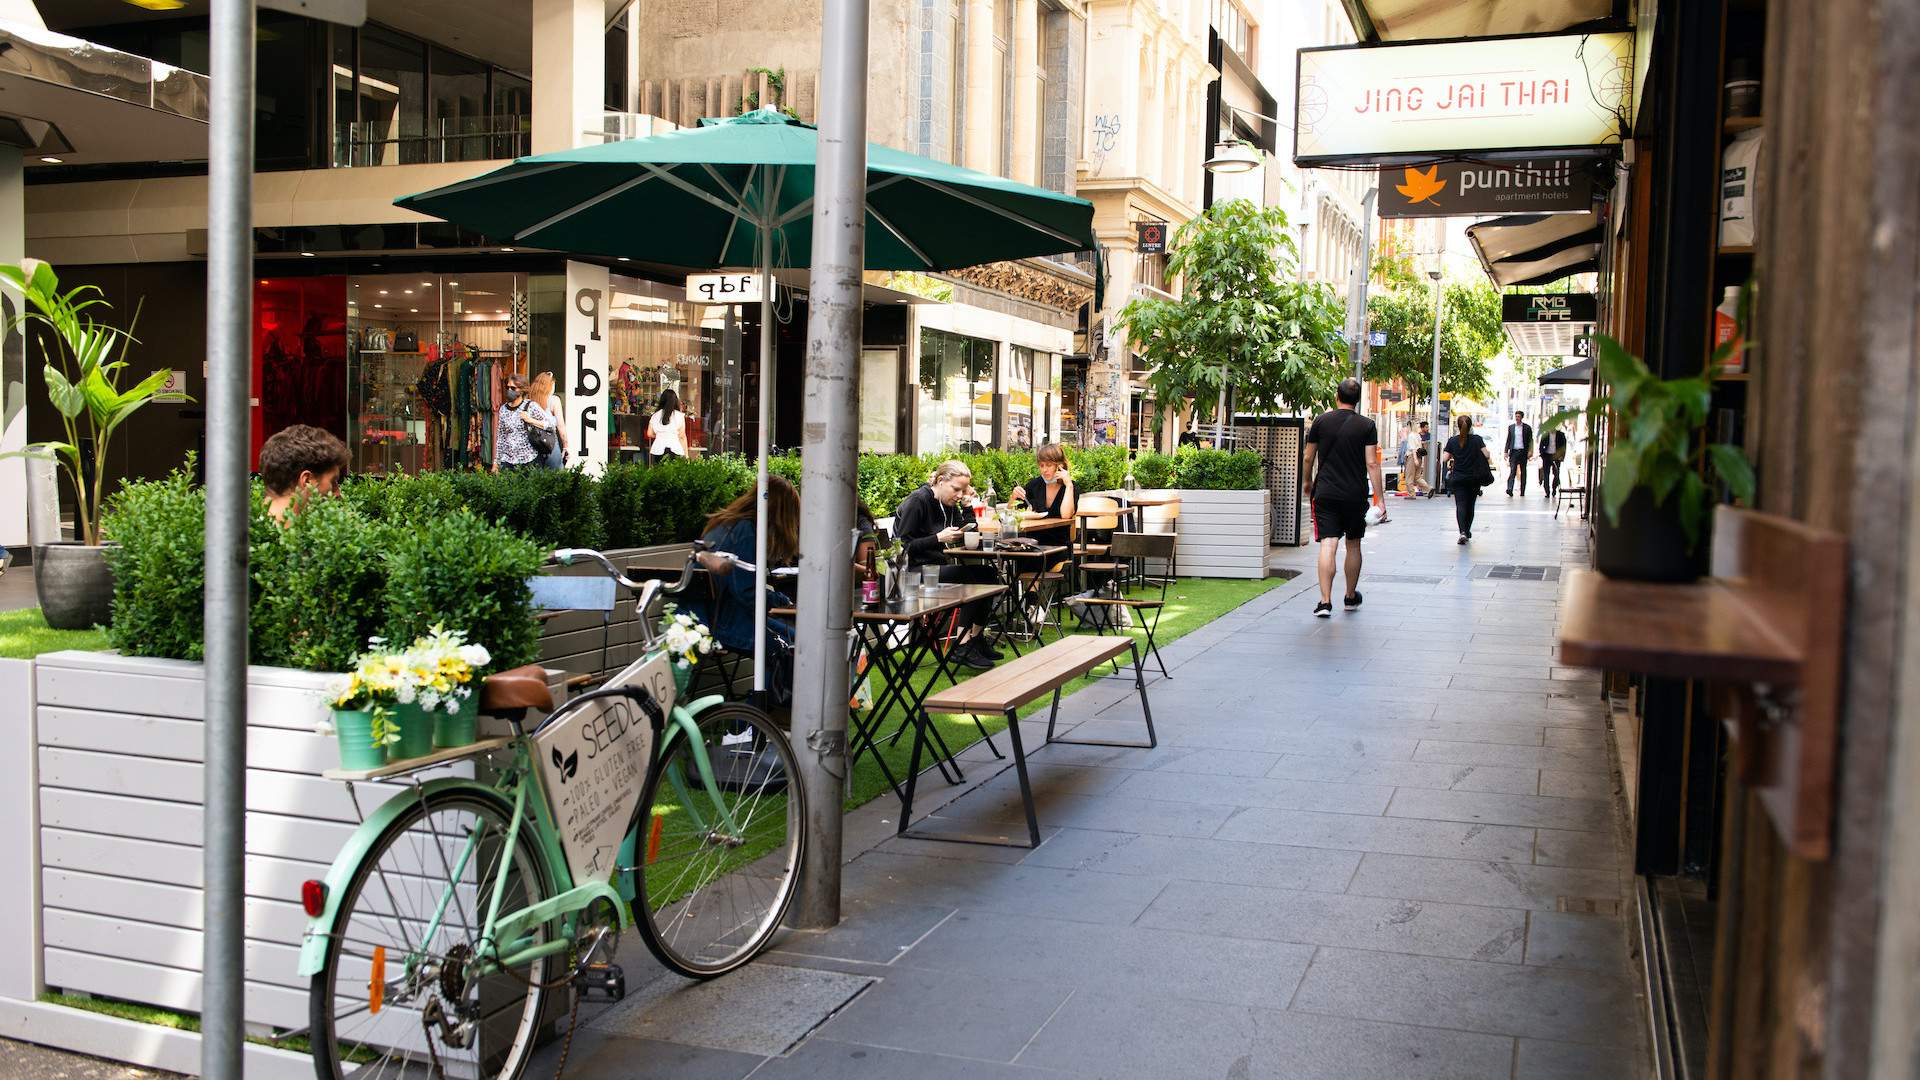 The City of Melbourne's New Outdoor Trading Initiative Will See Al Fresco Dining Areas Pop-Up in the CBD